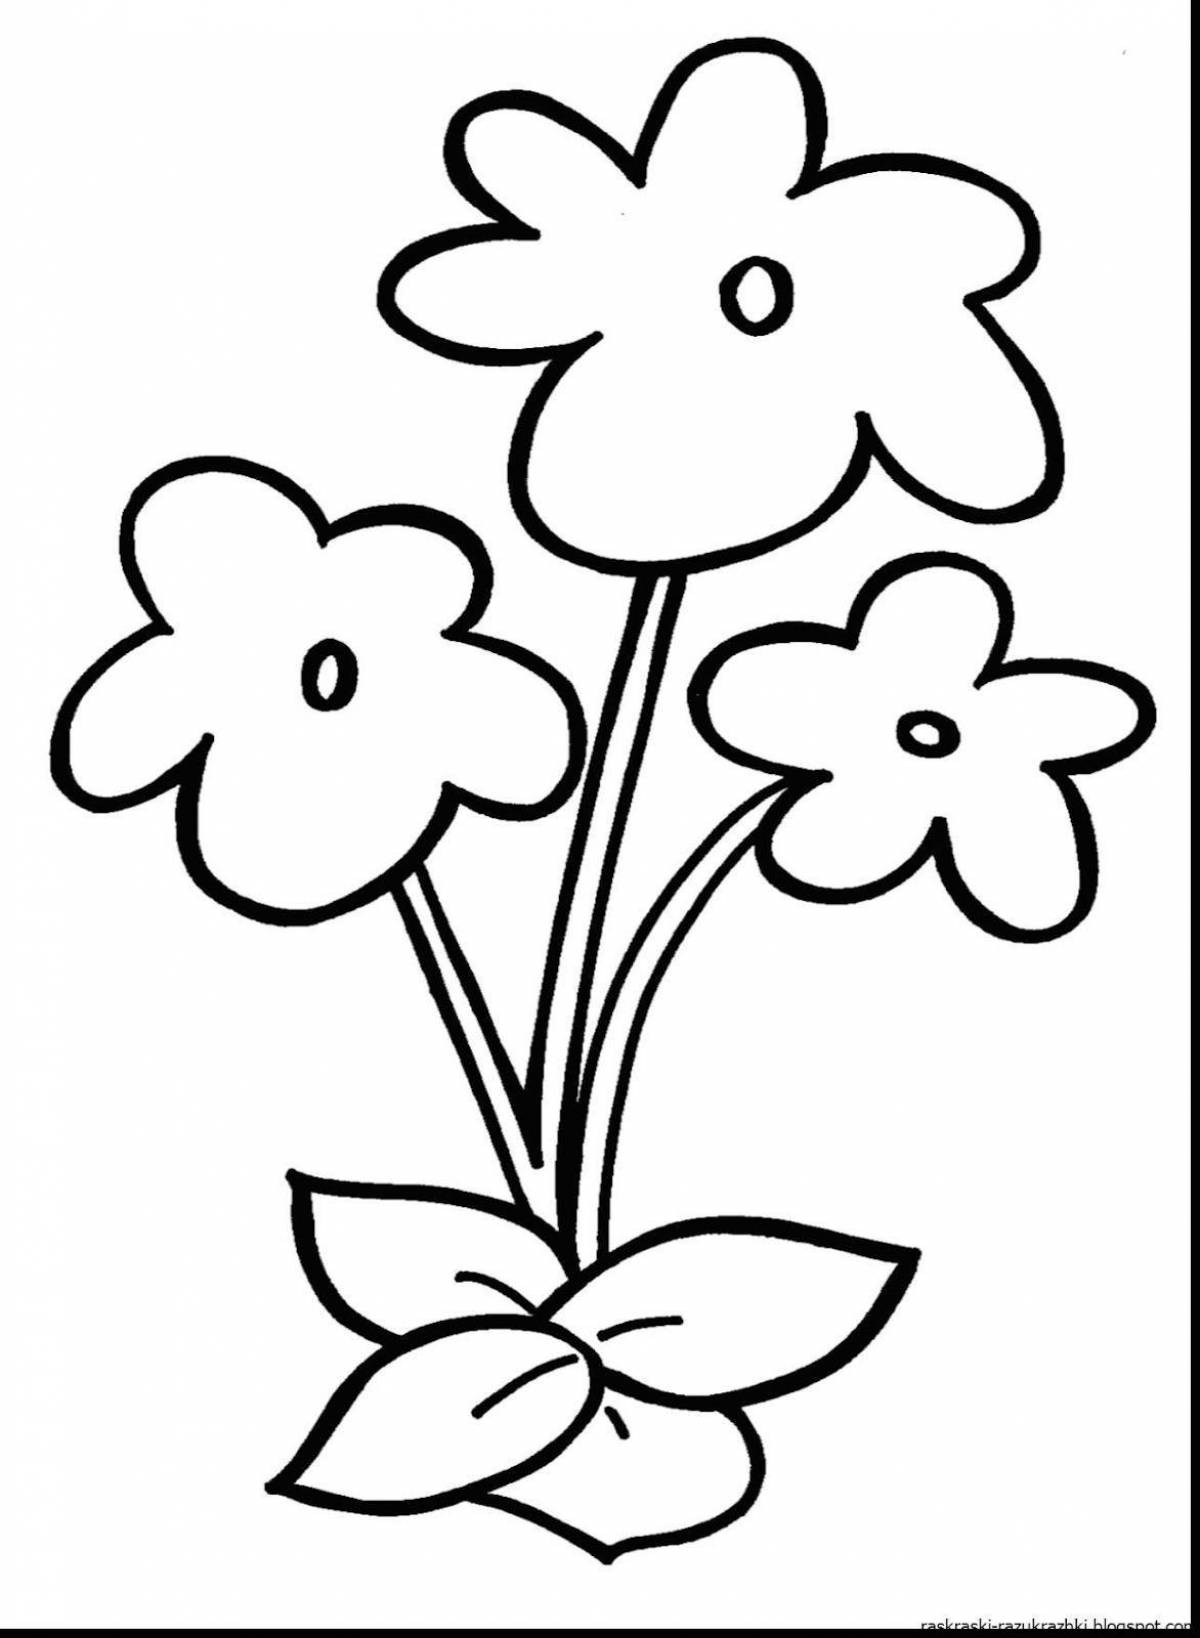 Adorable flower coloring book for 2-3 year olds